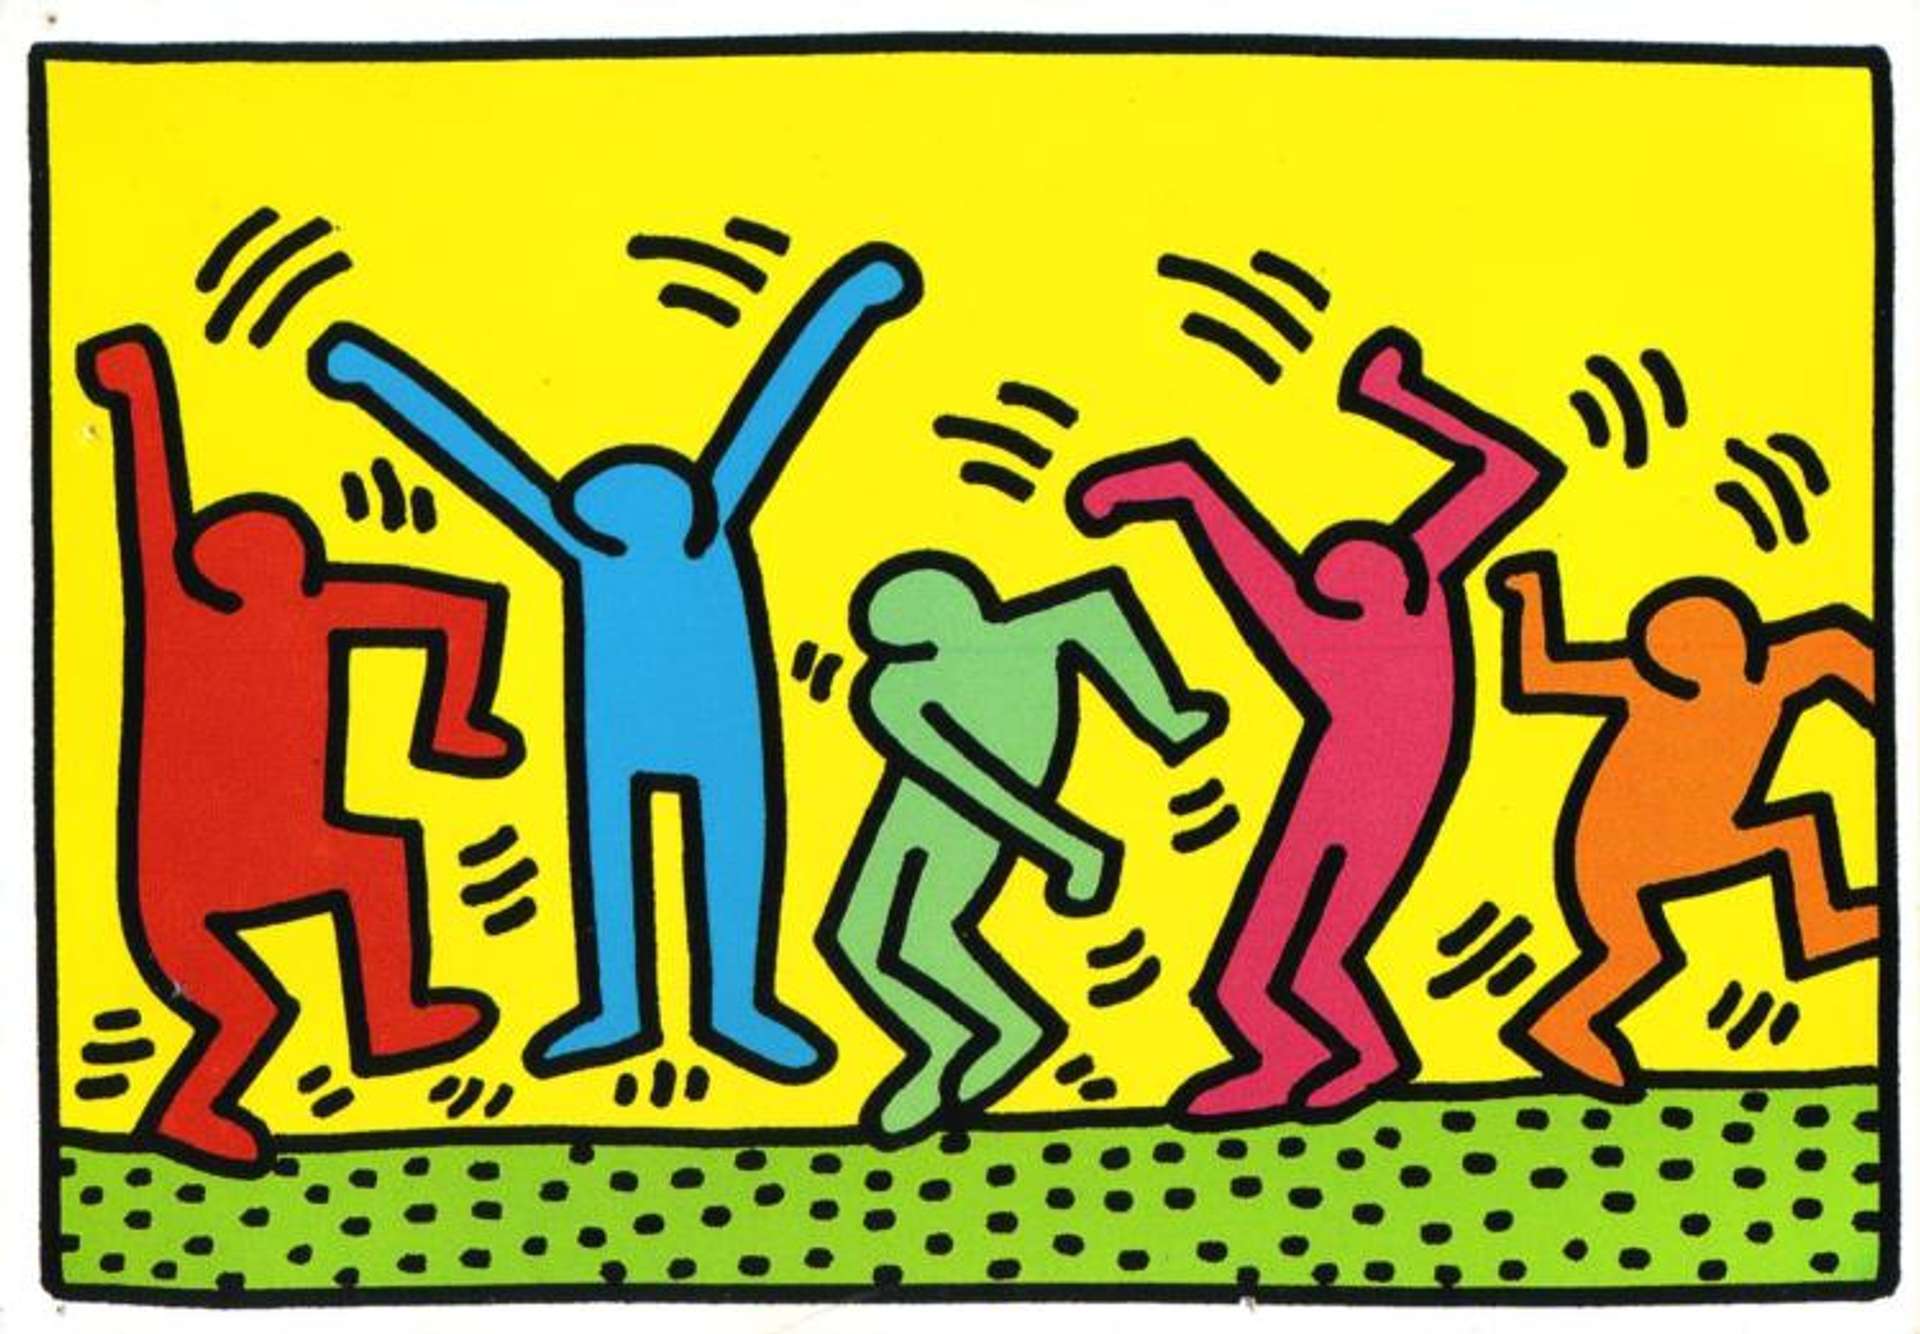 Movement and Dance in Keith Haring's Iconography